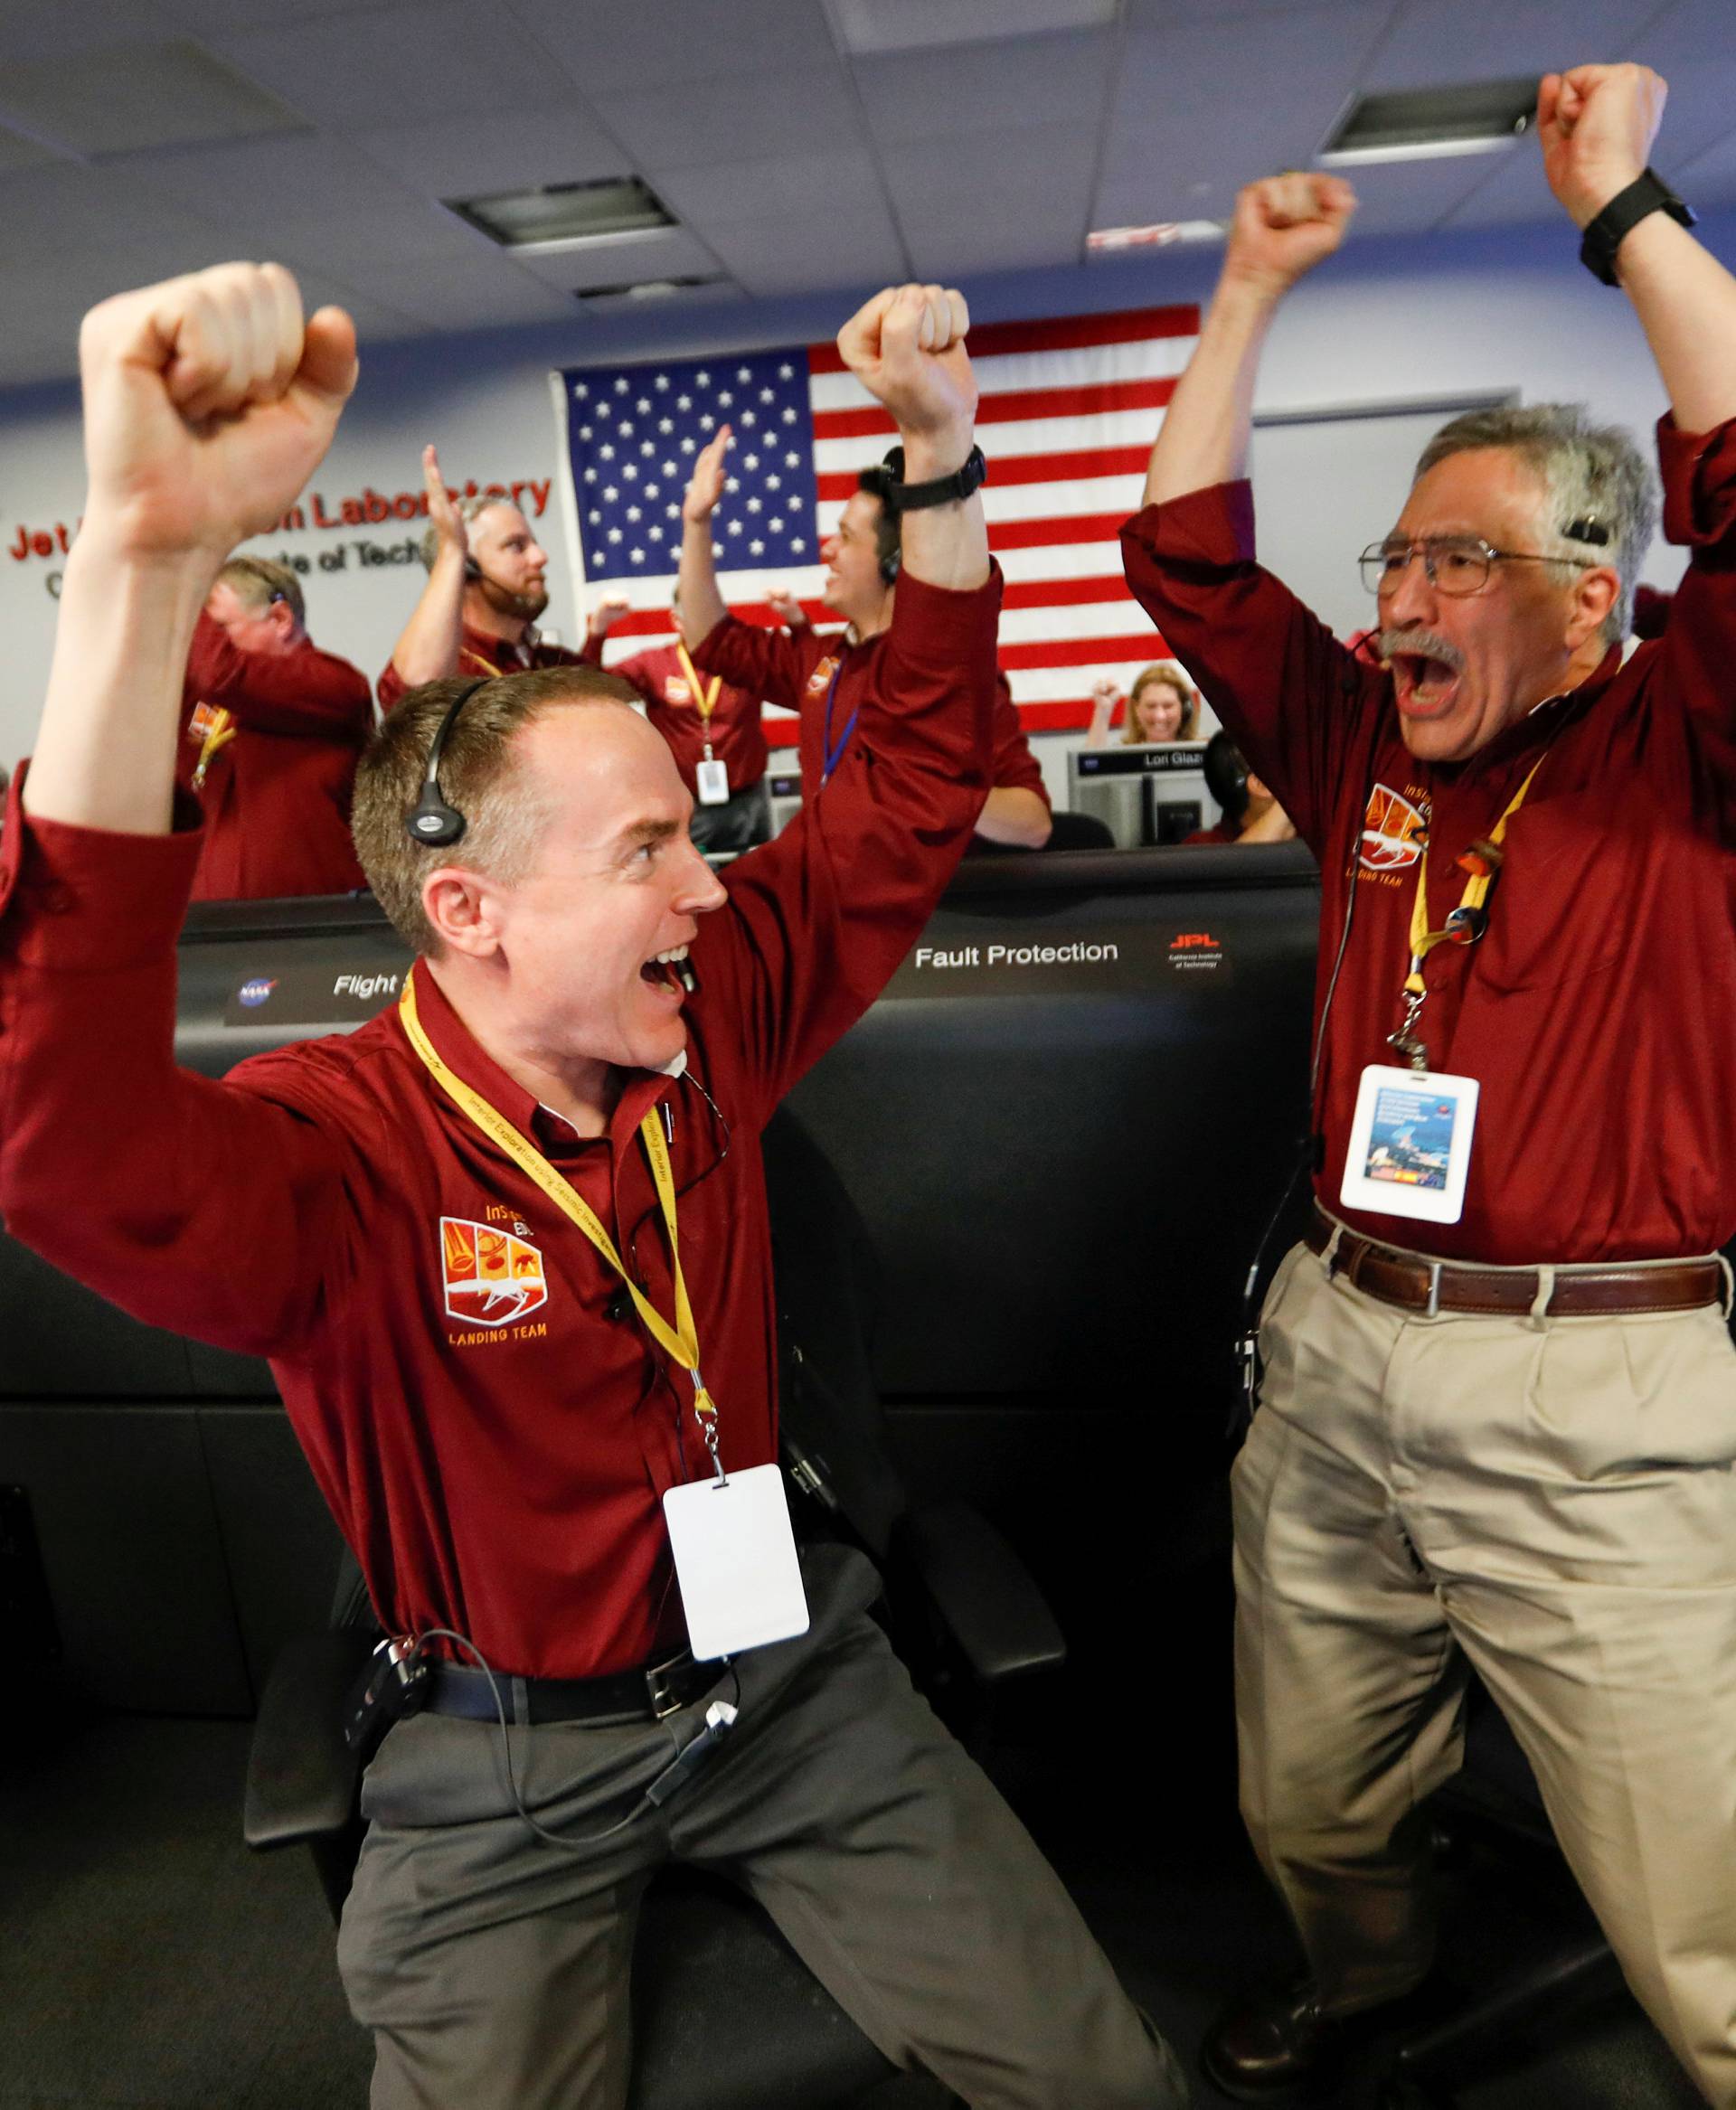 NASA engineers Kris Bruvold and Sandy Krasner react in the space flight operation facility at NASA's Jet Propulsion Laboratory (JPL) as the spaceship InSight lands on the surface of Mars after a six-month journey, at JPL in Pasadena